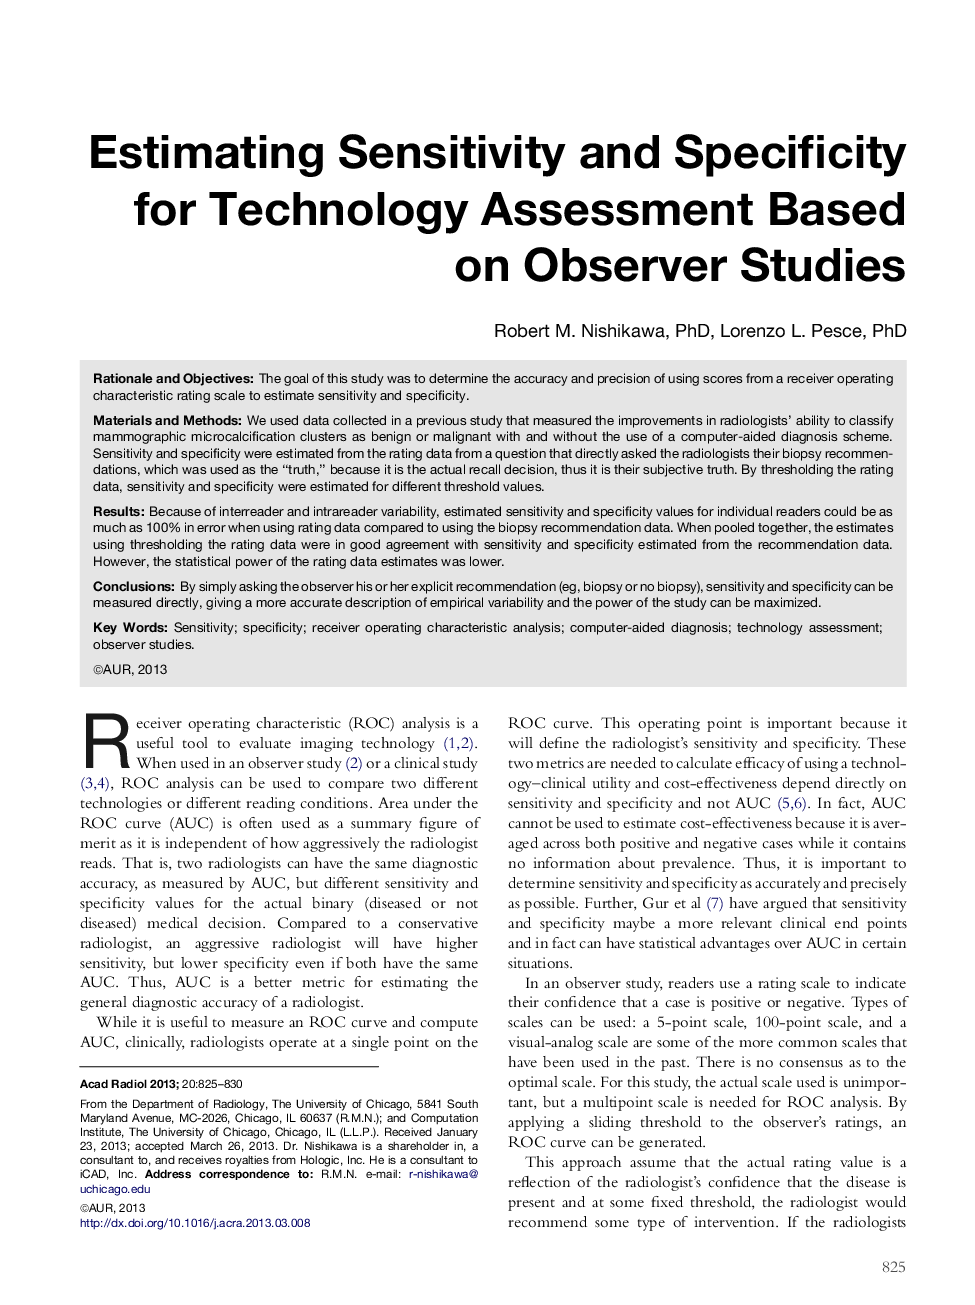 Estimating Sensitivity and Specificity for Technology Assessment Based on Observer Studies